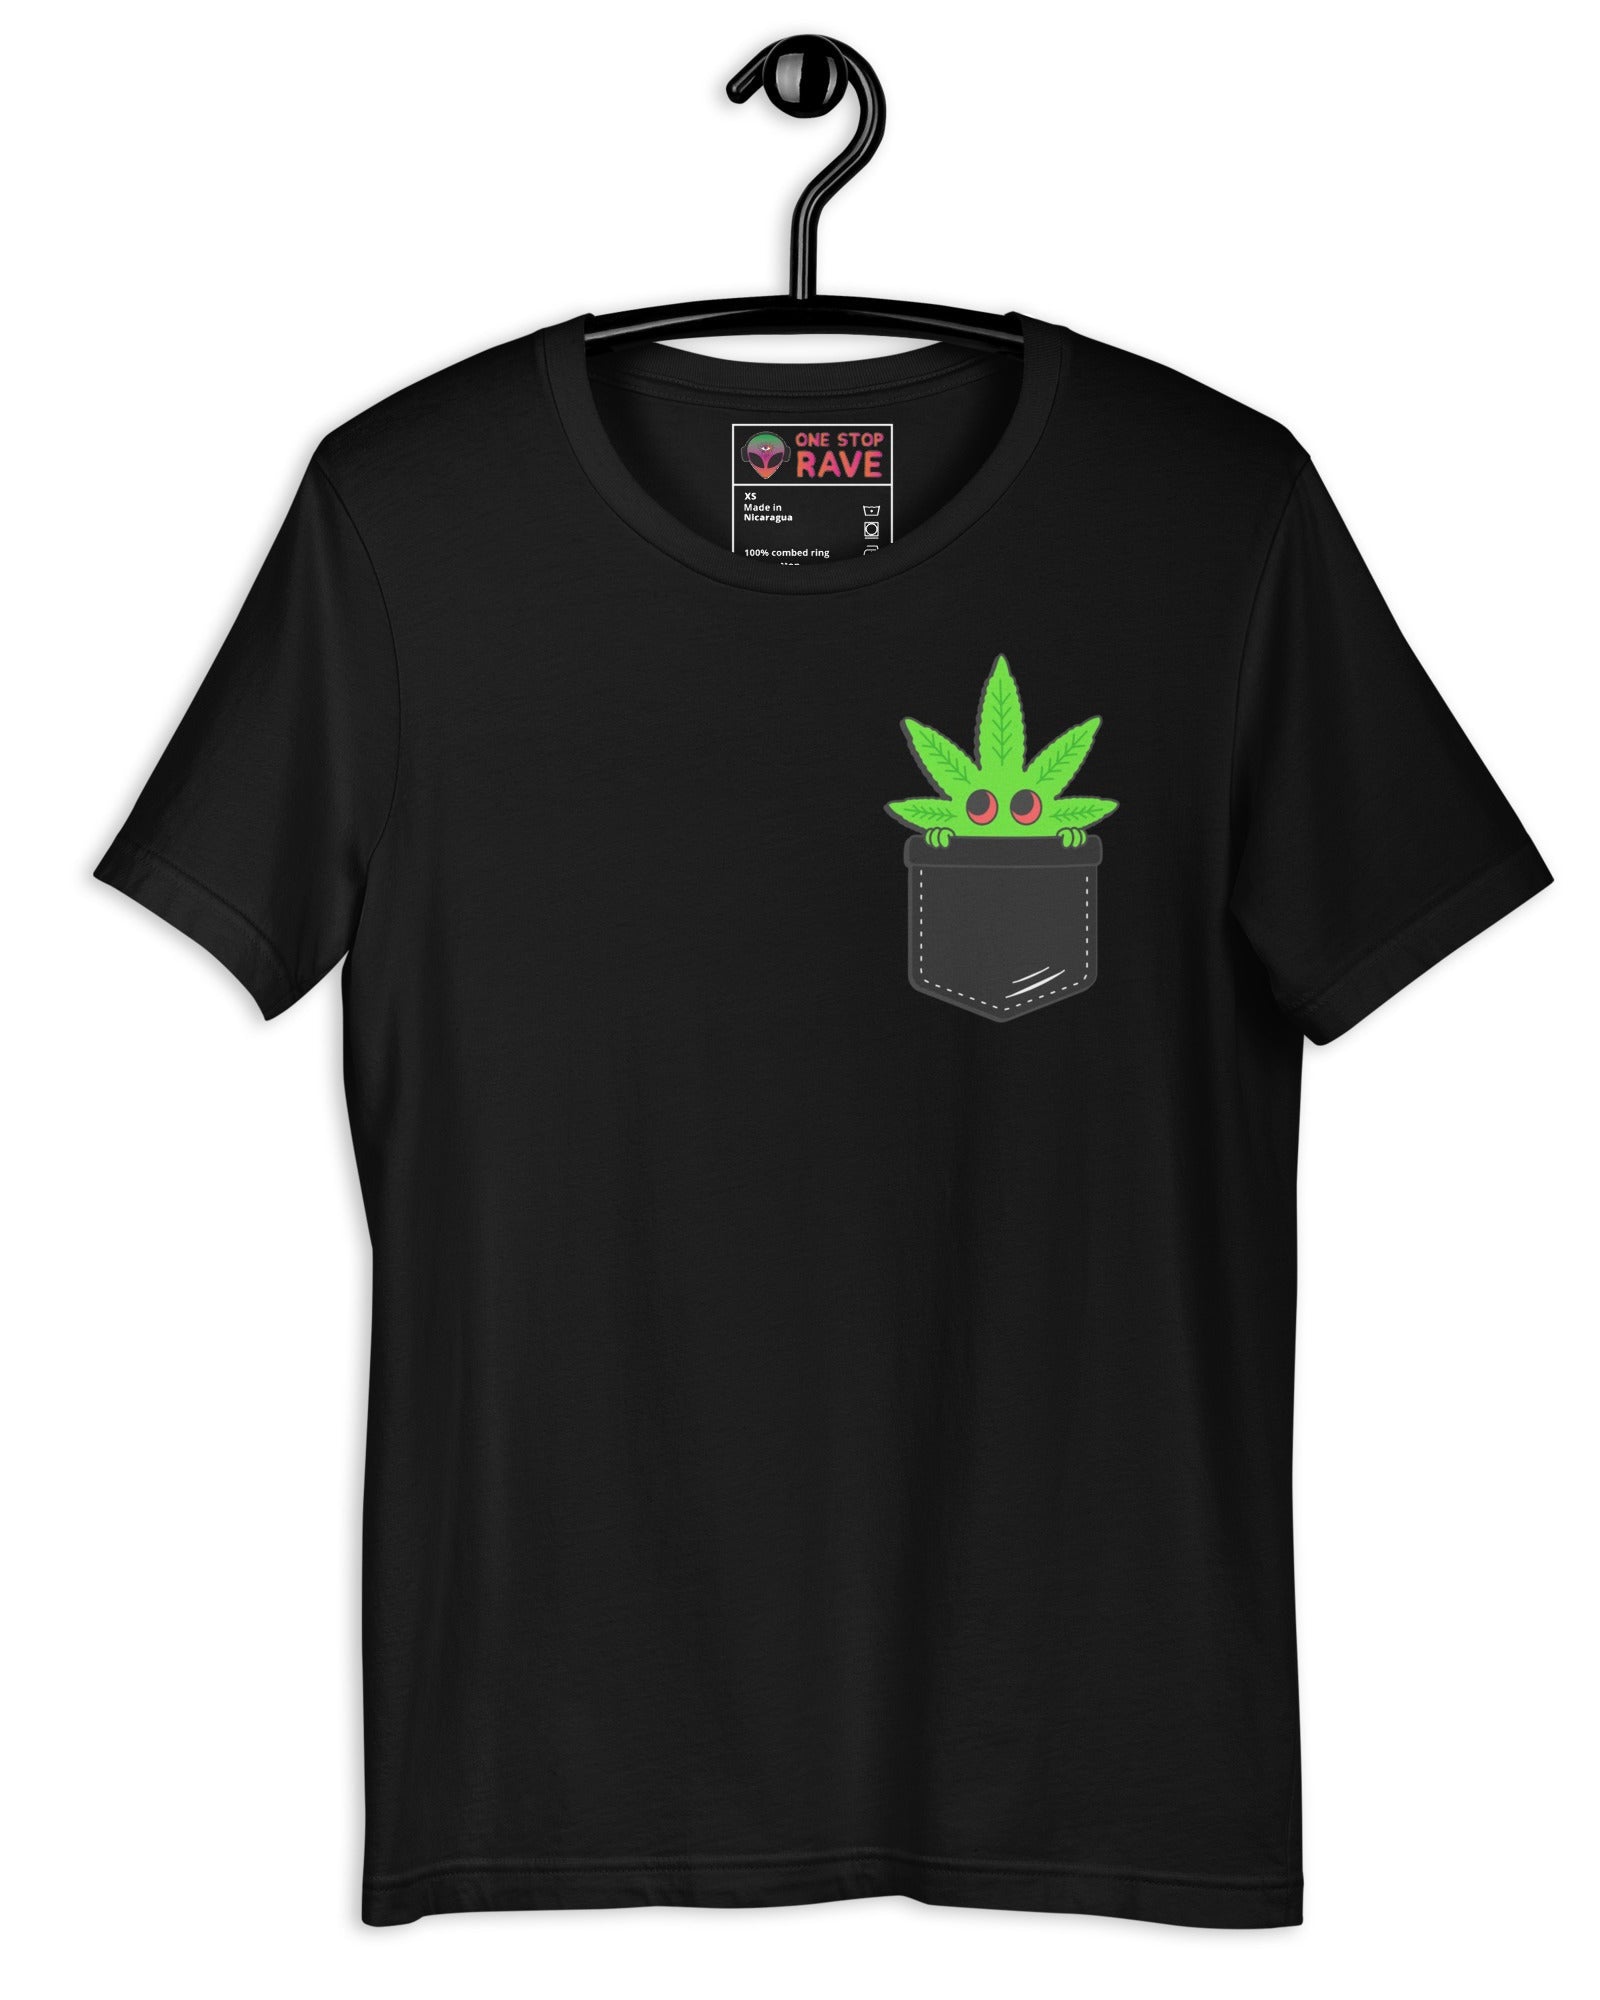 Pocket Weed T-Shirt, T-Shirt, - One Stop Rave